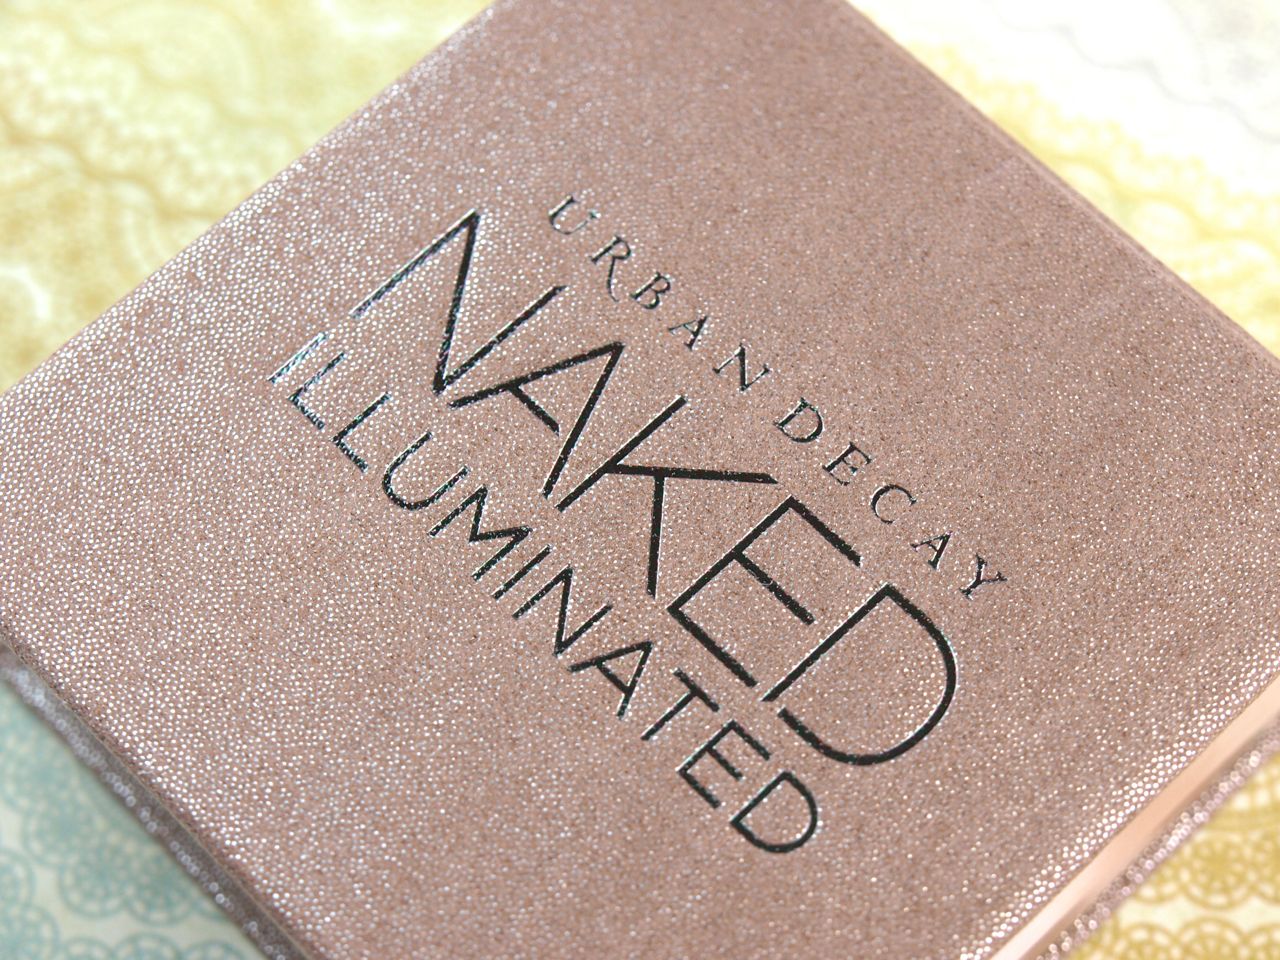 Decay Naked Illuminated Highlighter in "Aura": Review and Swatches | The Sloths: Beauty, Makeup, Skincare with Reviews and Swatches